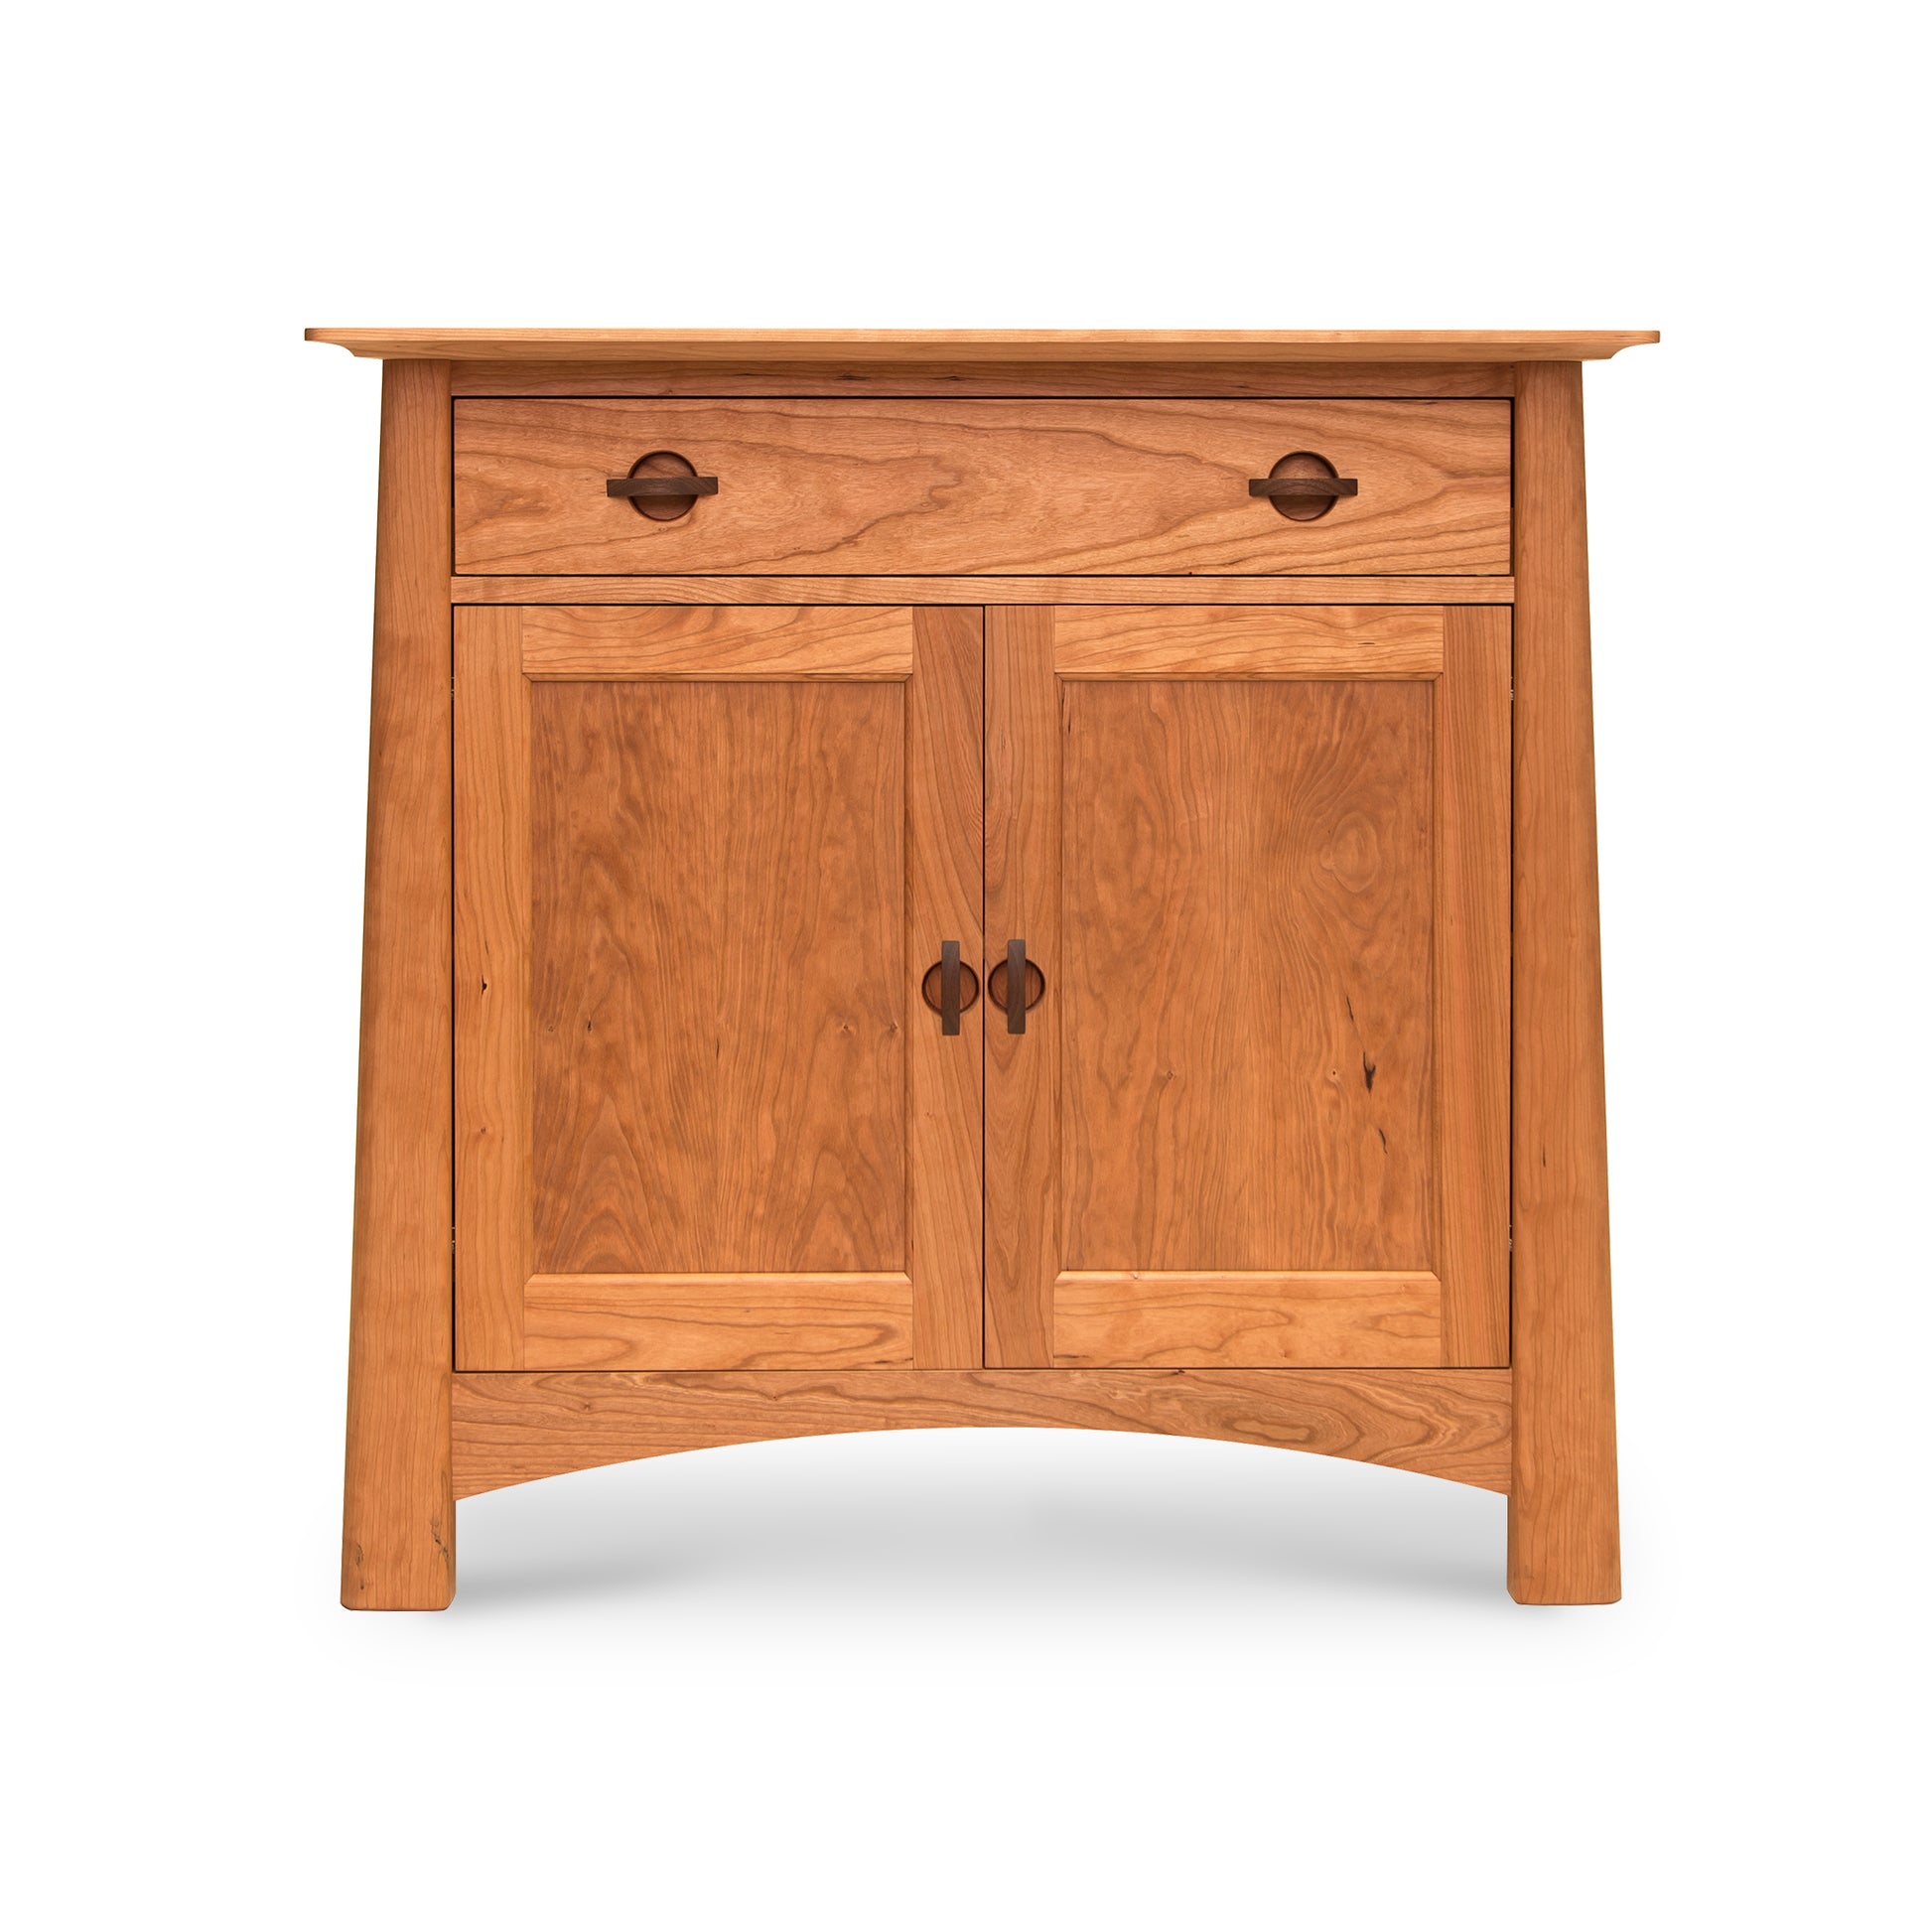 An eco-friendly Cherry Moon Small 38" Sideboard cabinet with two doors, two drawers, and extra storage by Maple Corner Woodworks.